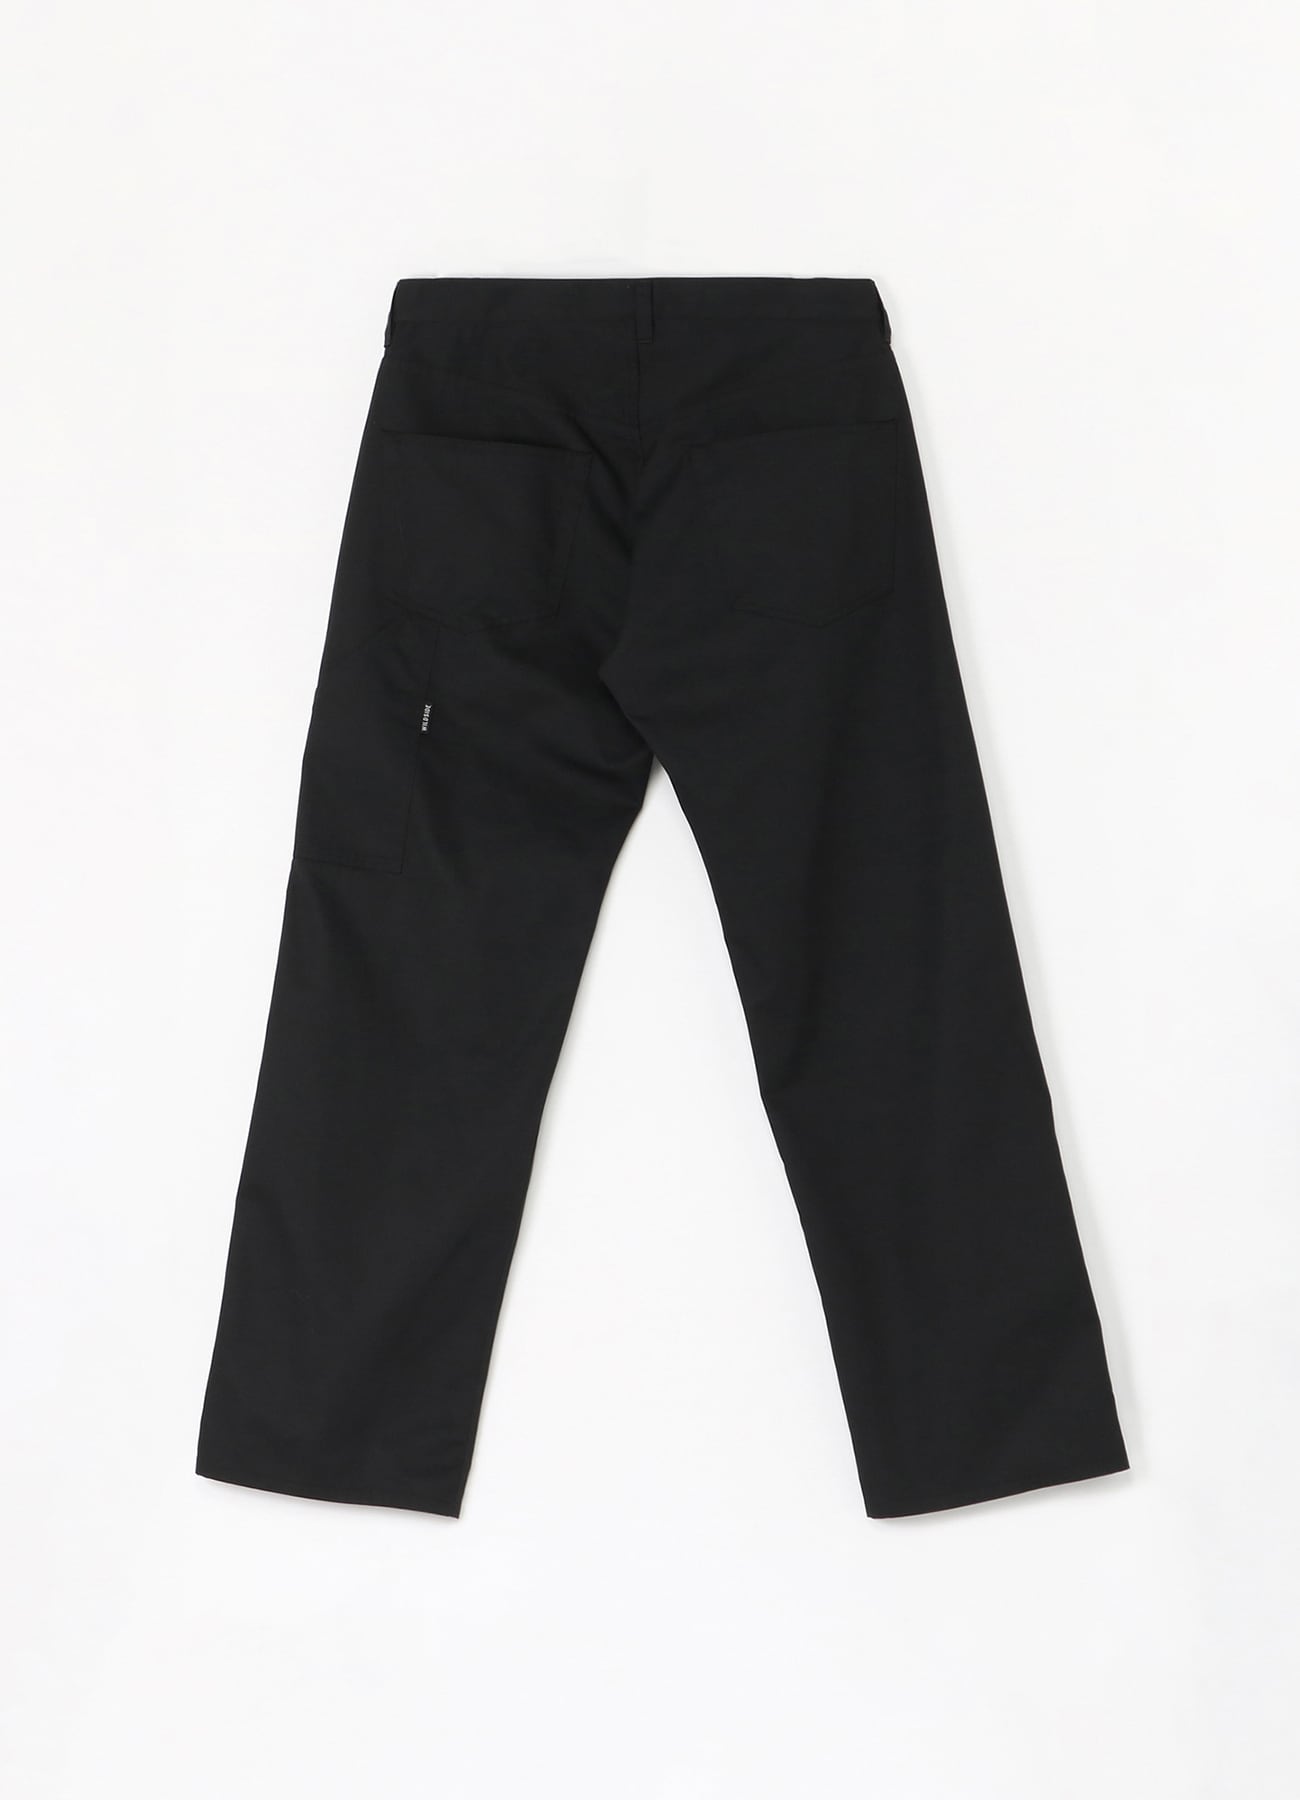 T/C Twill Jeans Silhouette Double Knee Pants